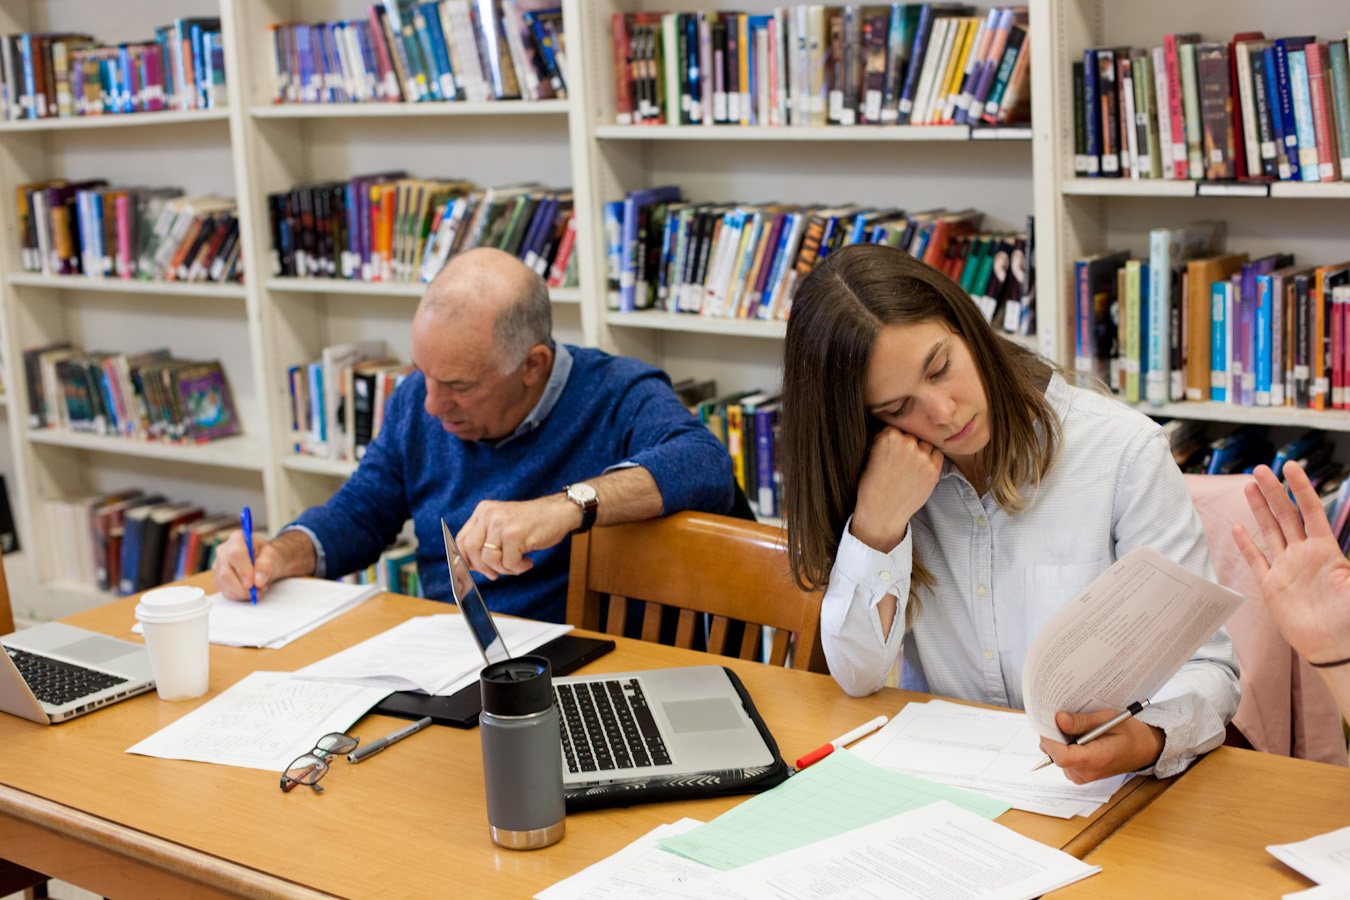 Two teachers studying materials, with the one on the left taking notes